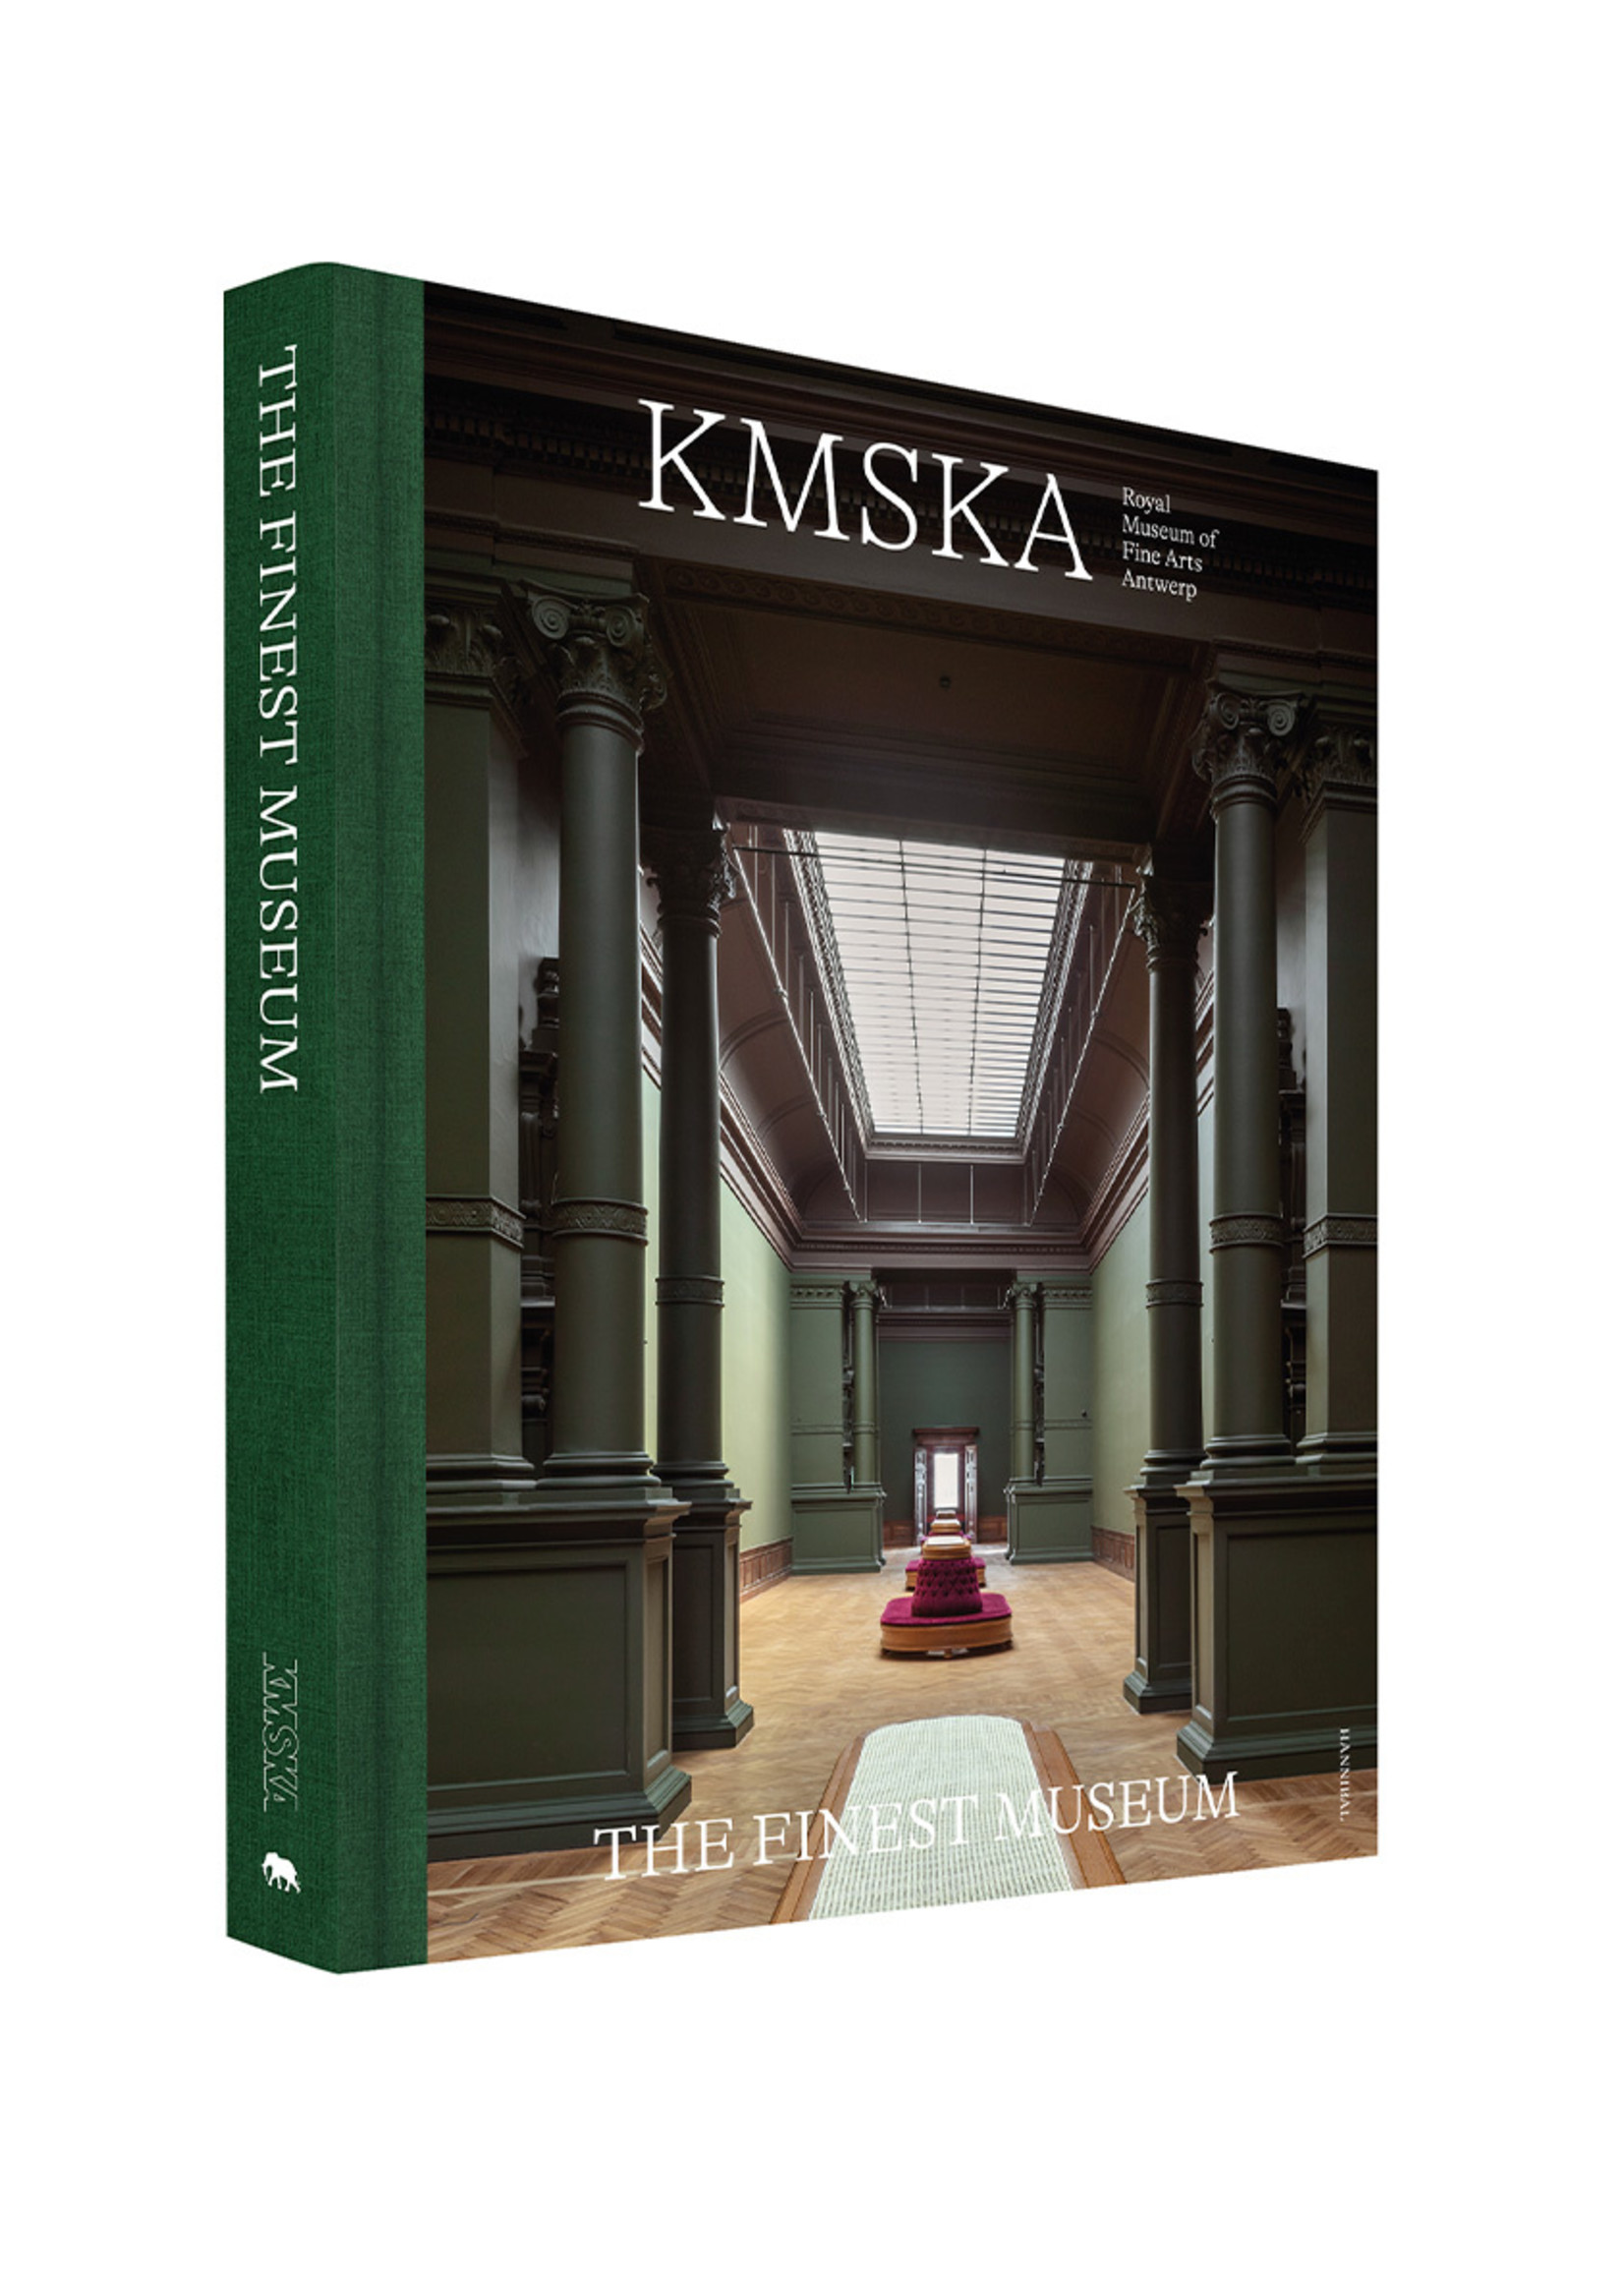 KMSKA – THE FINEST MUSEUM Softcover English version